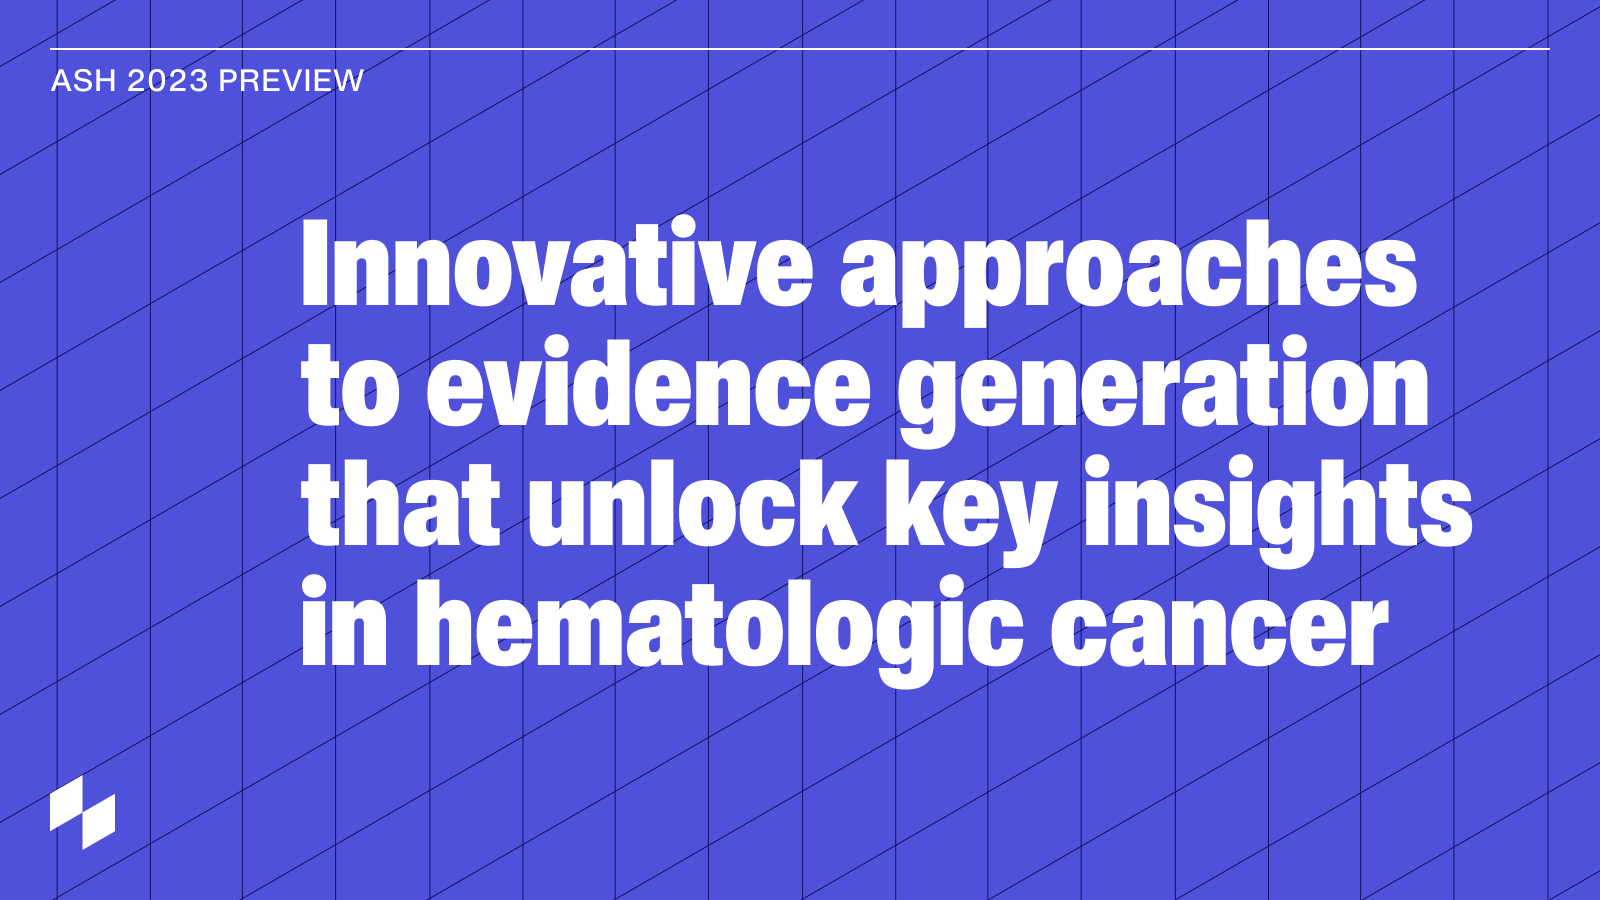 ASH 2023 Preview Webinar: Innovative approaches to evidence generation that unlock key insights in hematologic cancer